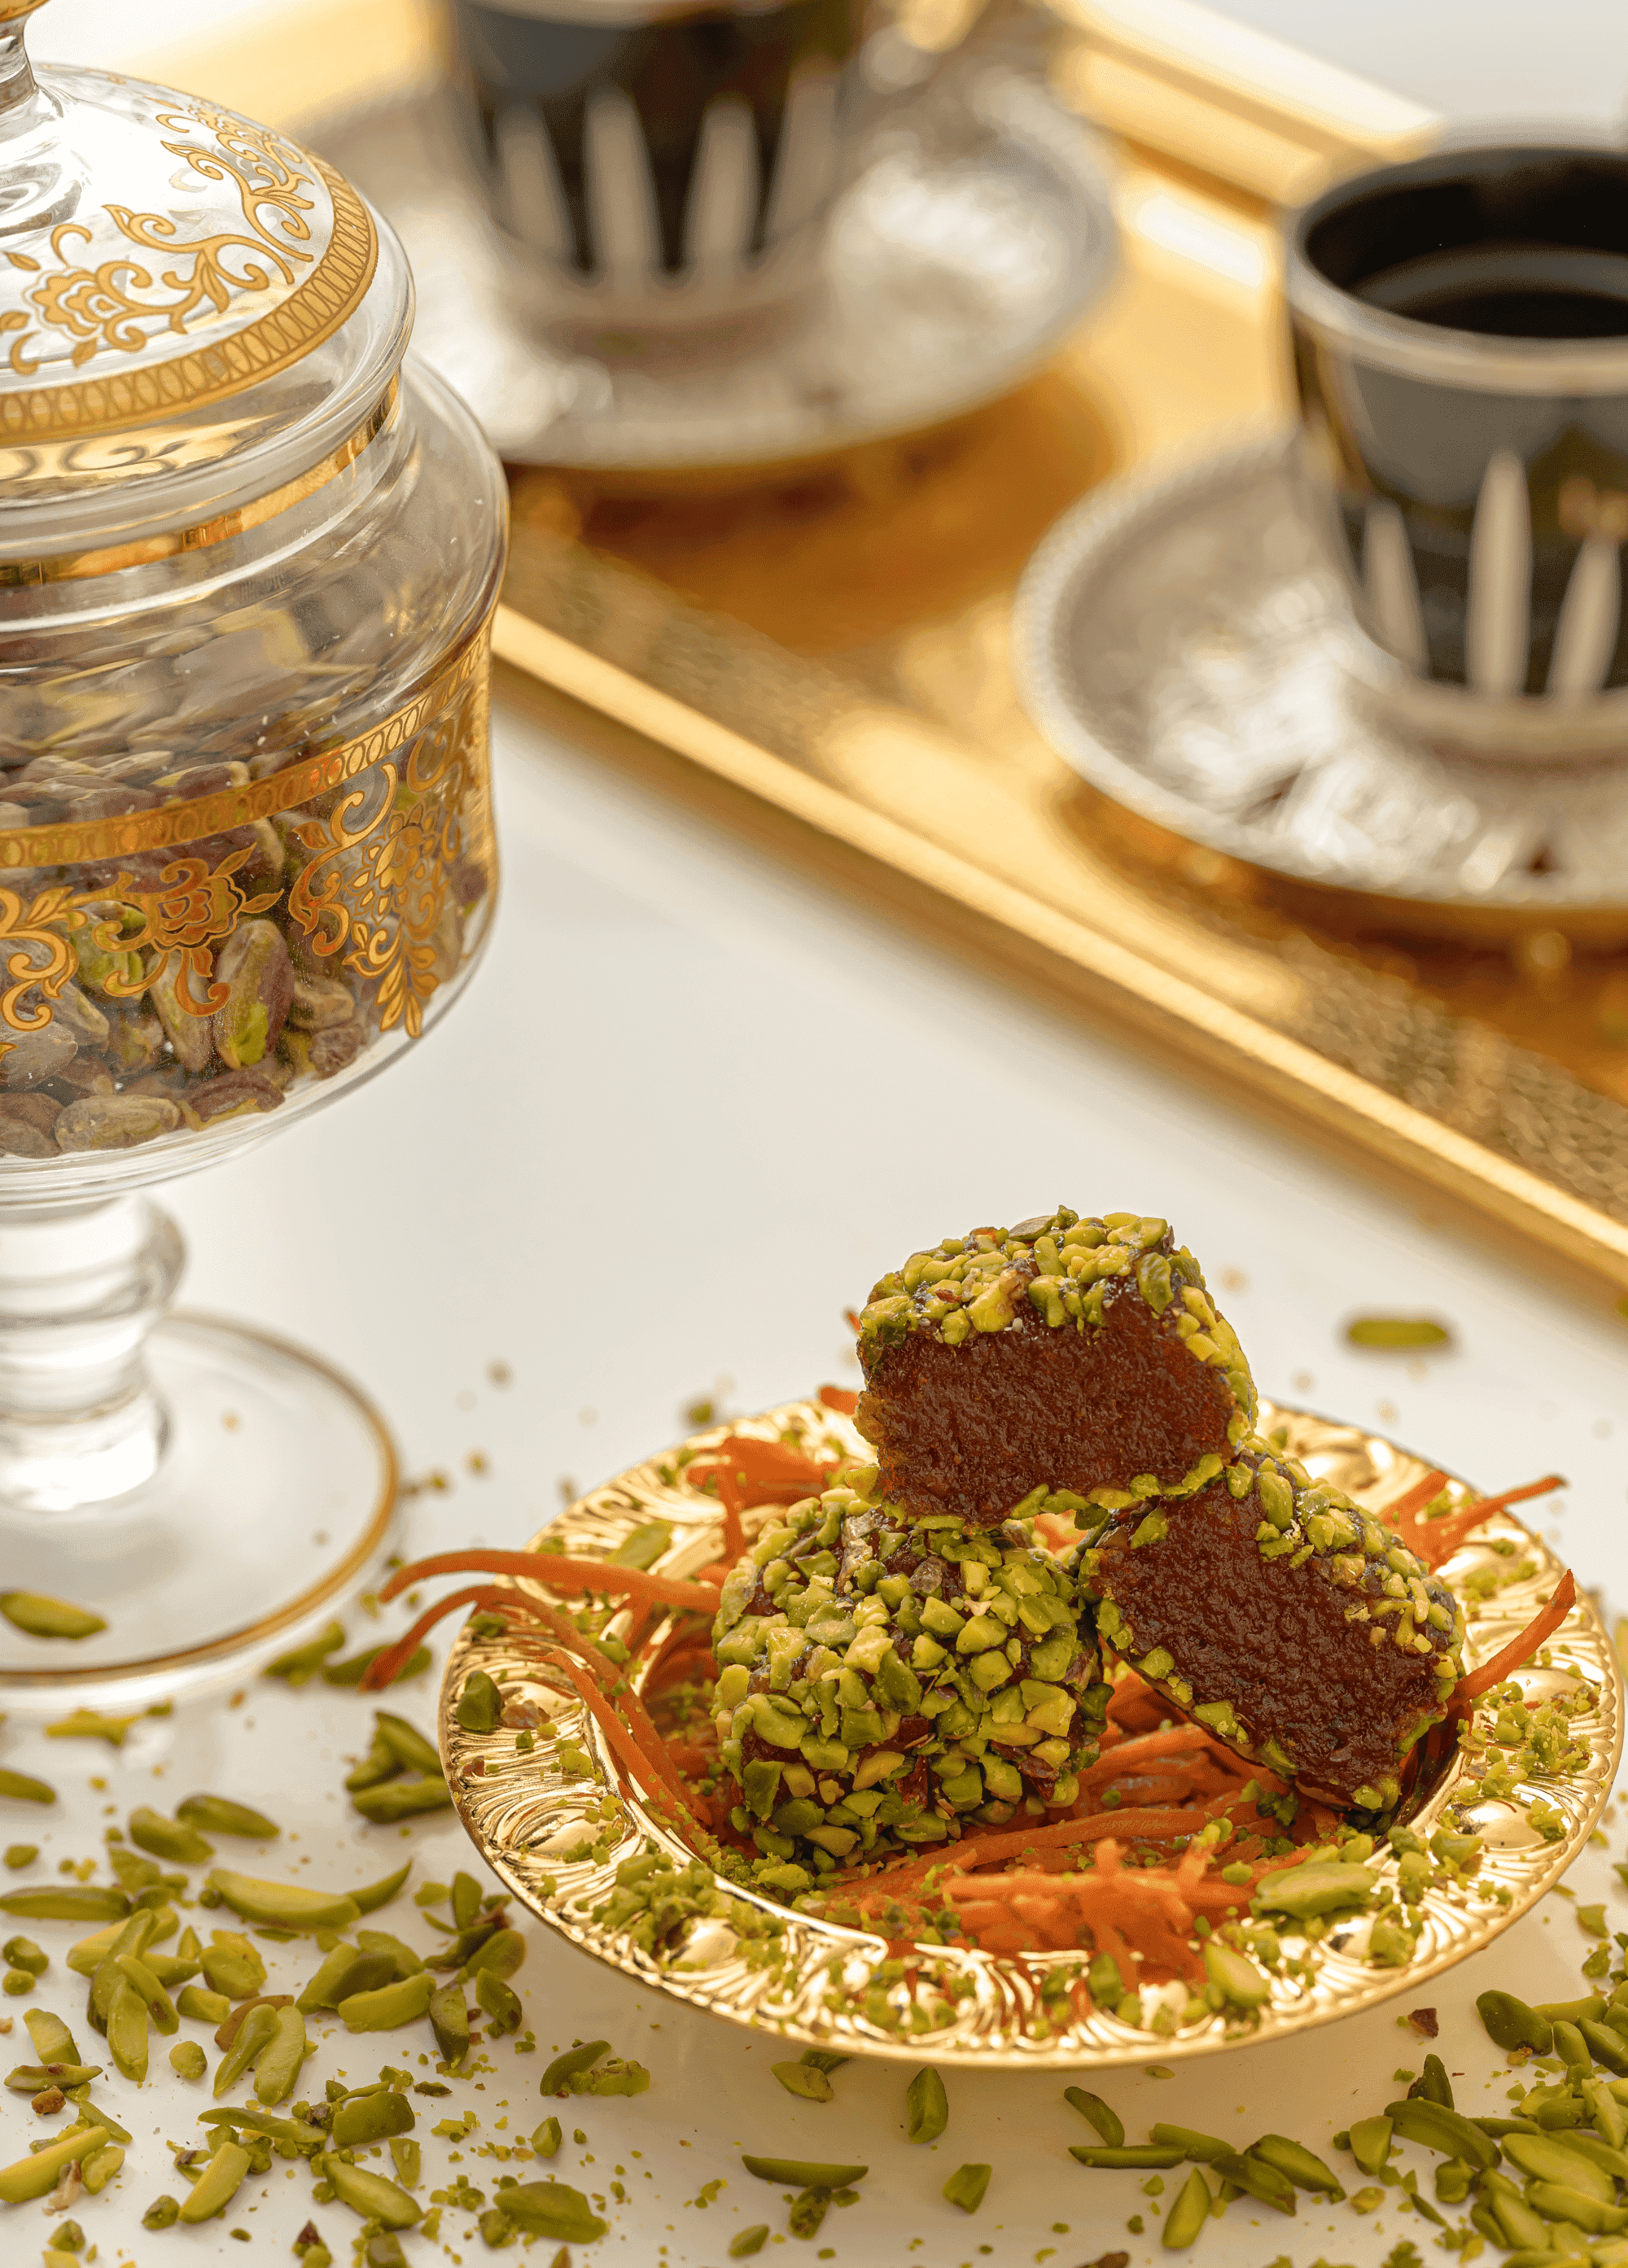 Jazaria with crushed Antep pistachios